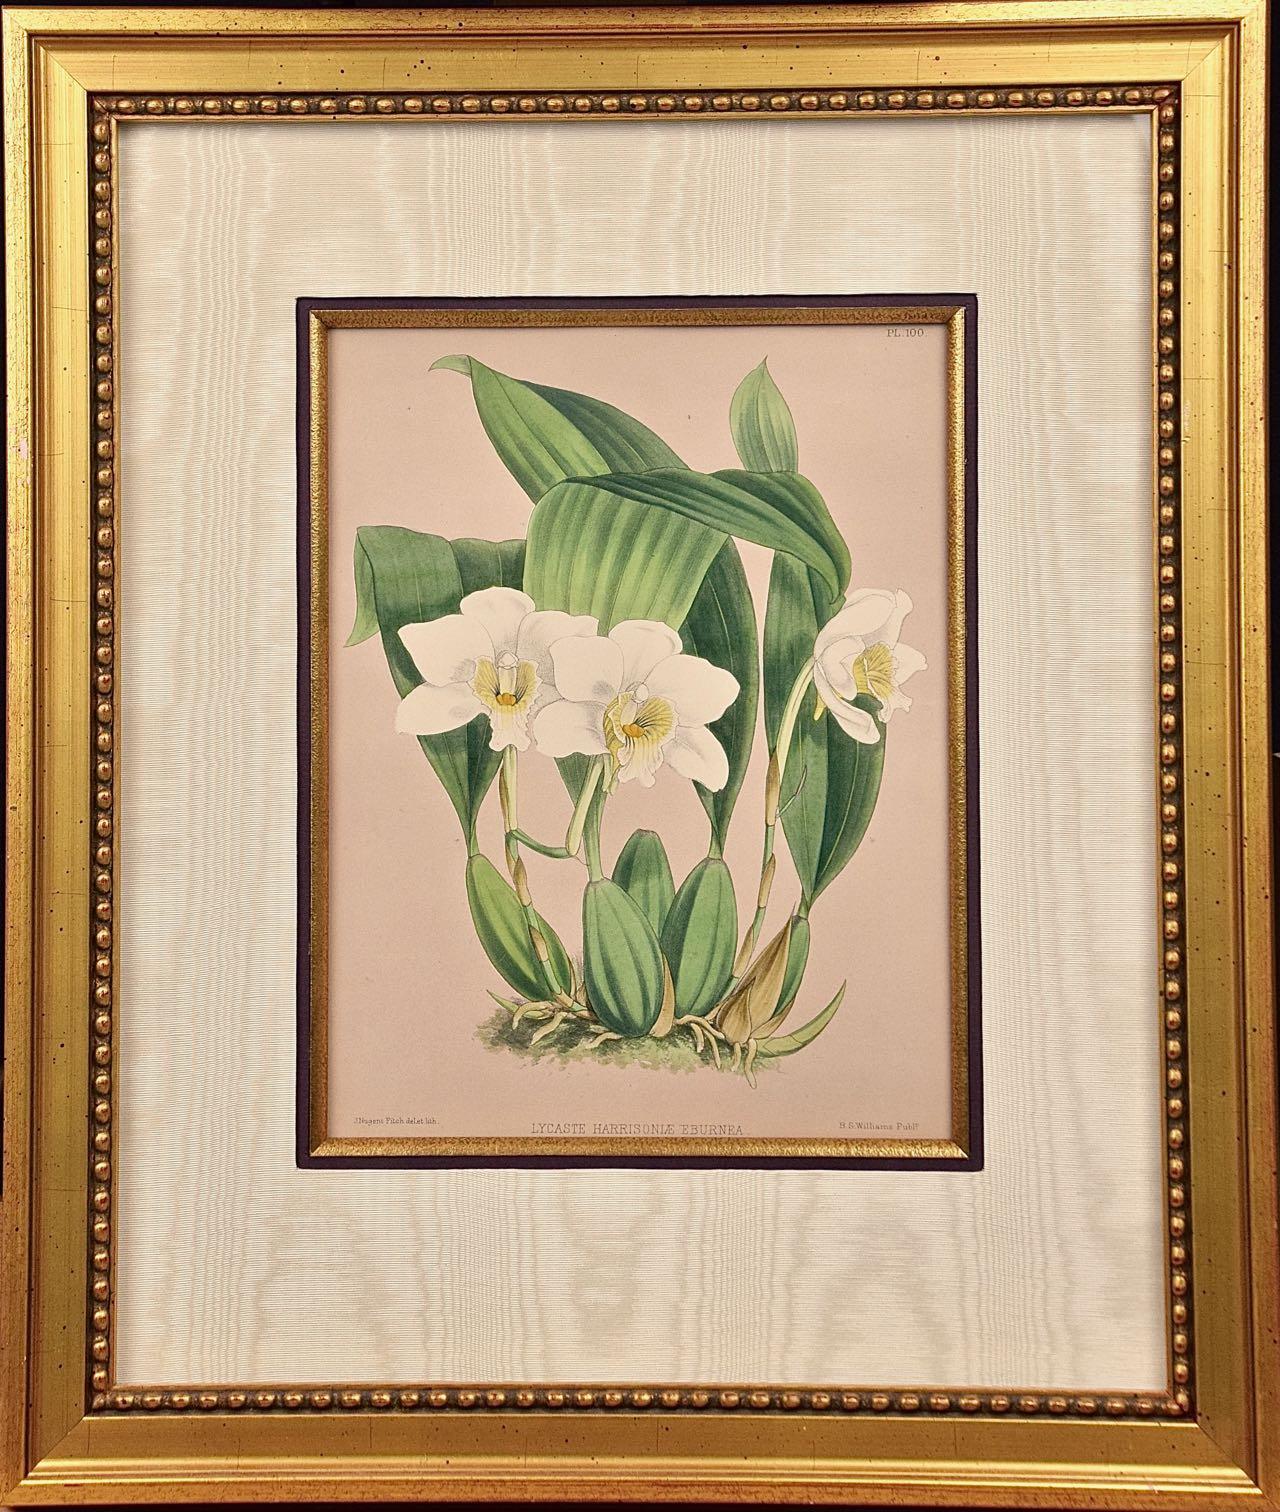 Orchids" Framed 19th C. Hand-Colored Engraving of "Lycaste Harrisoniae" by Fitch